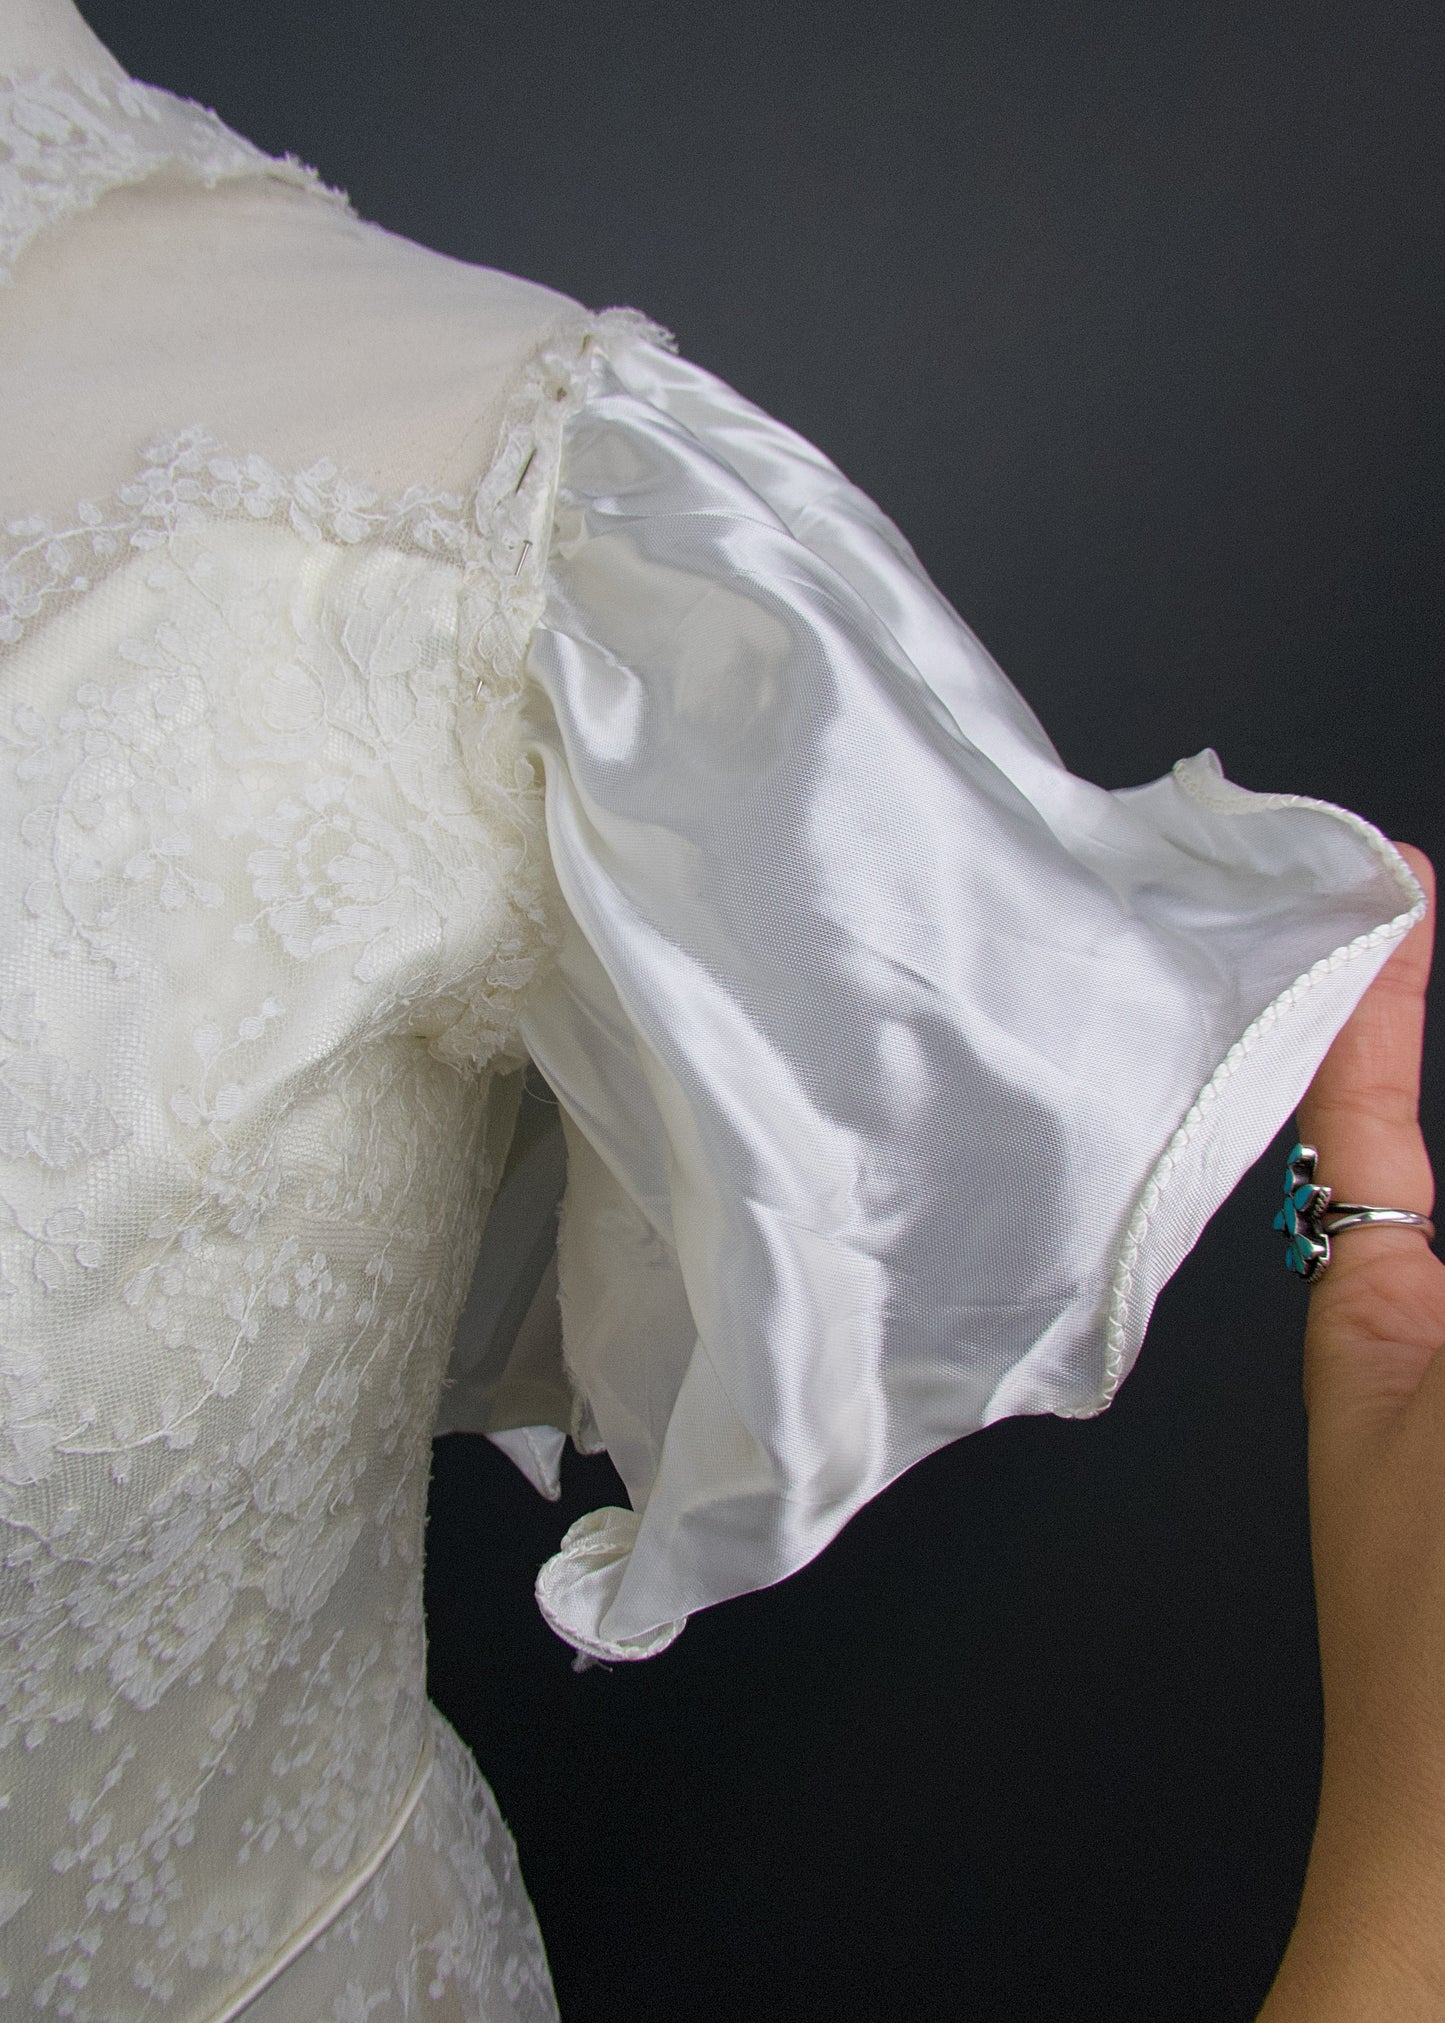 7 Inch Bridal White Ruffle Satin Trim, Sold by the yard